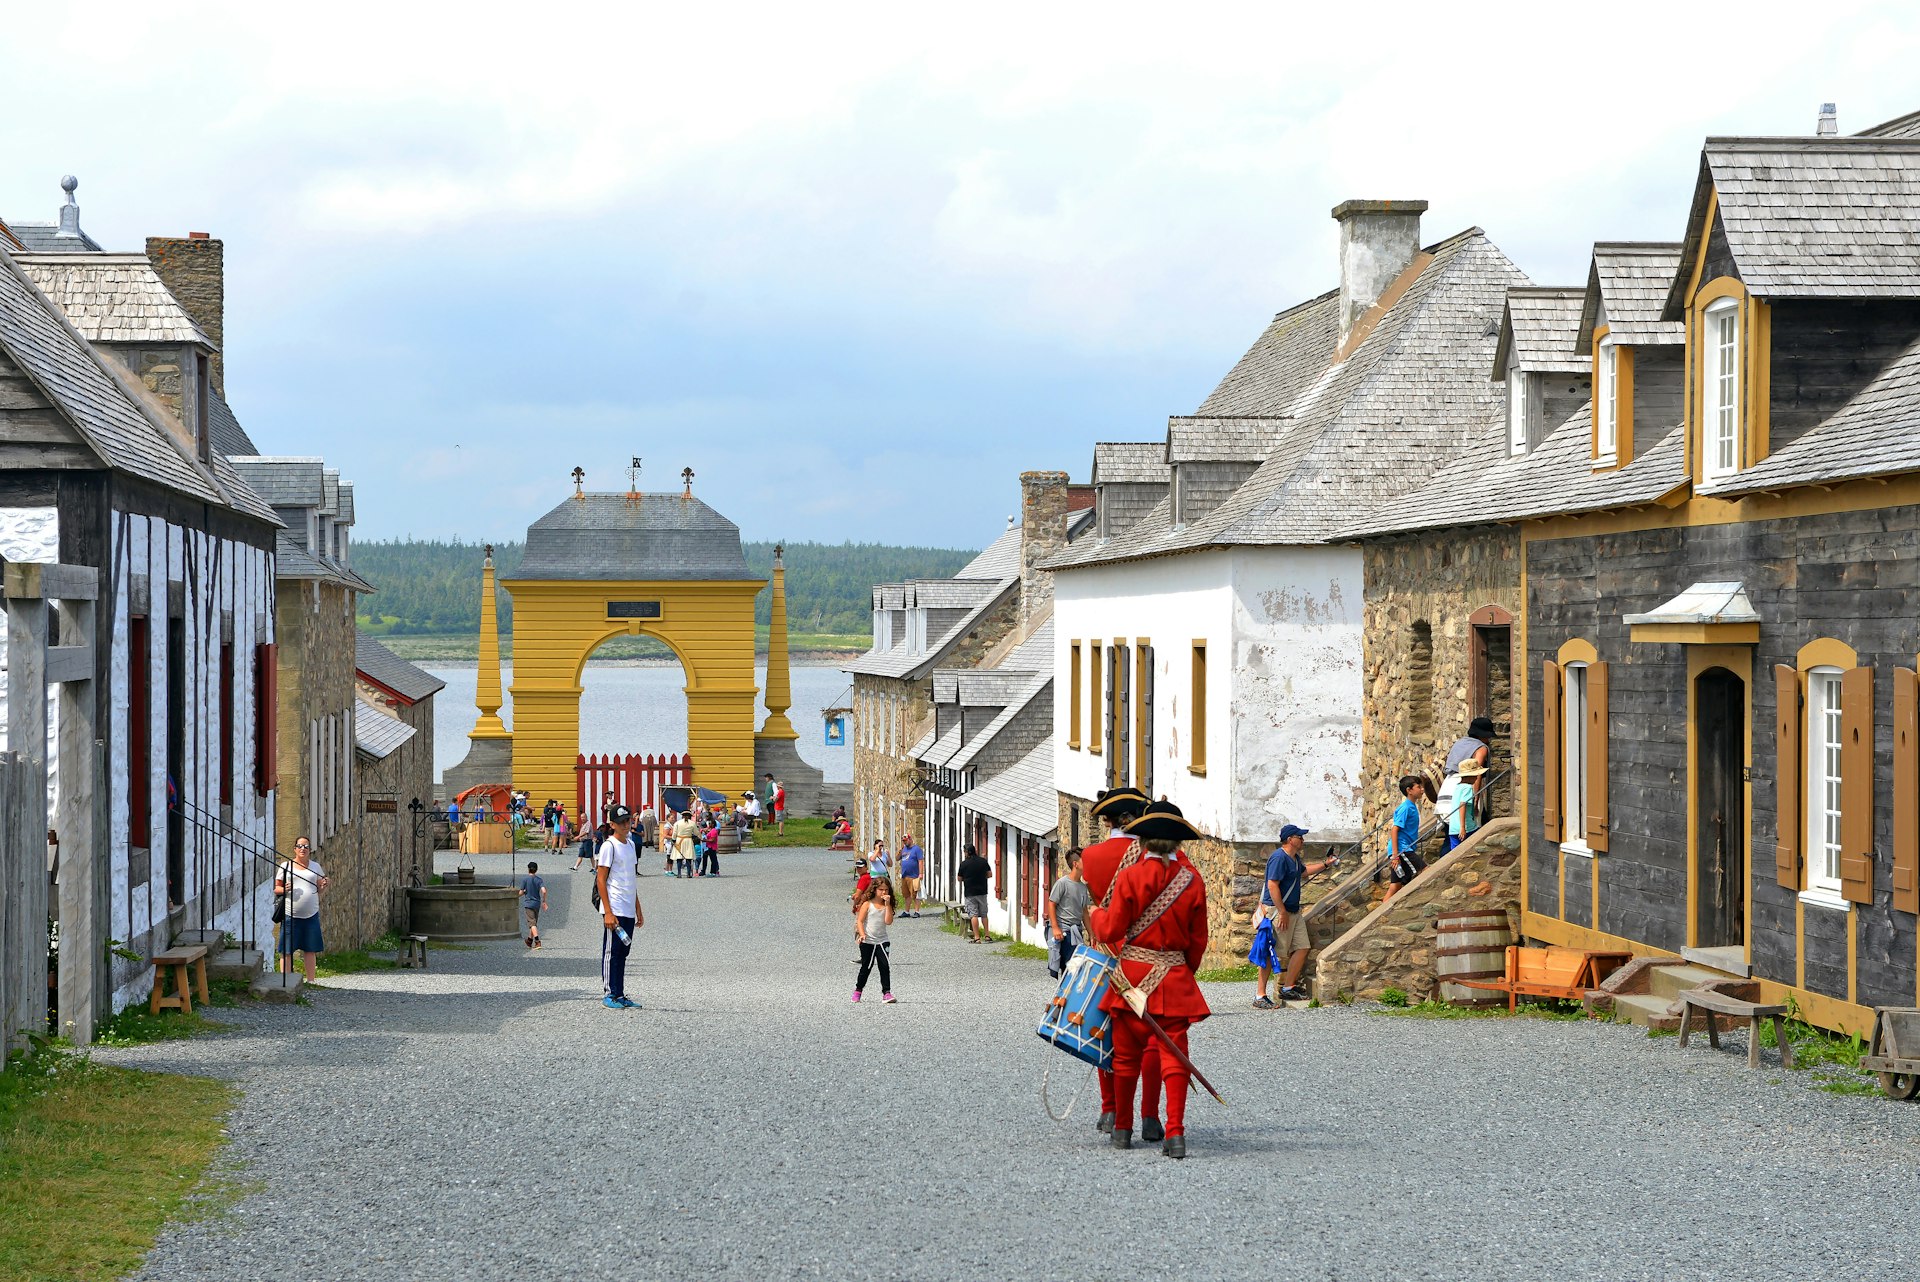 Tourists walk alongside people dressed as soldiers from the 1700s in historic street 